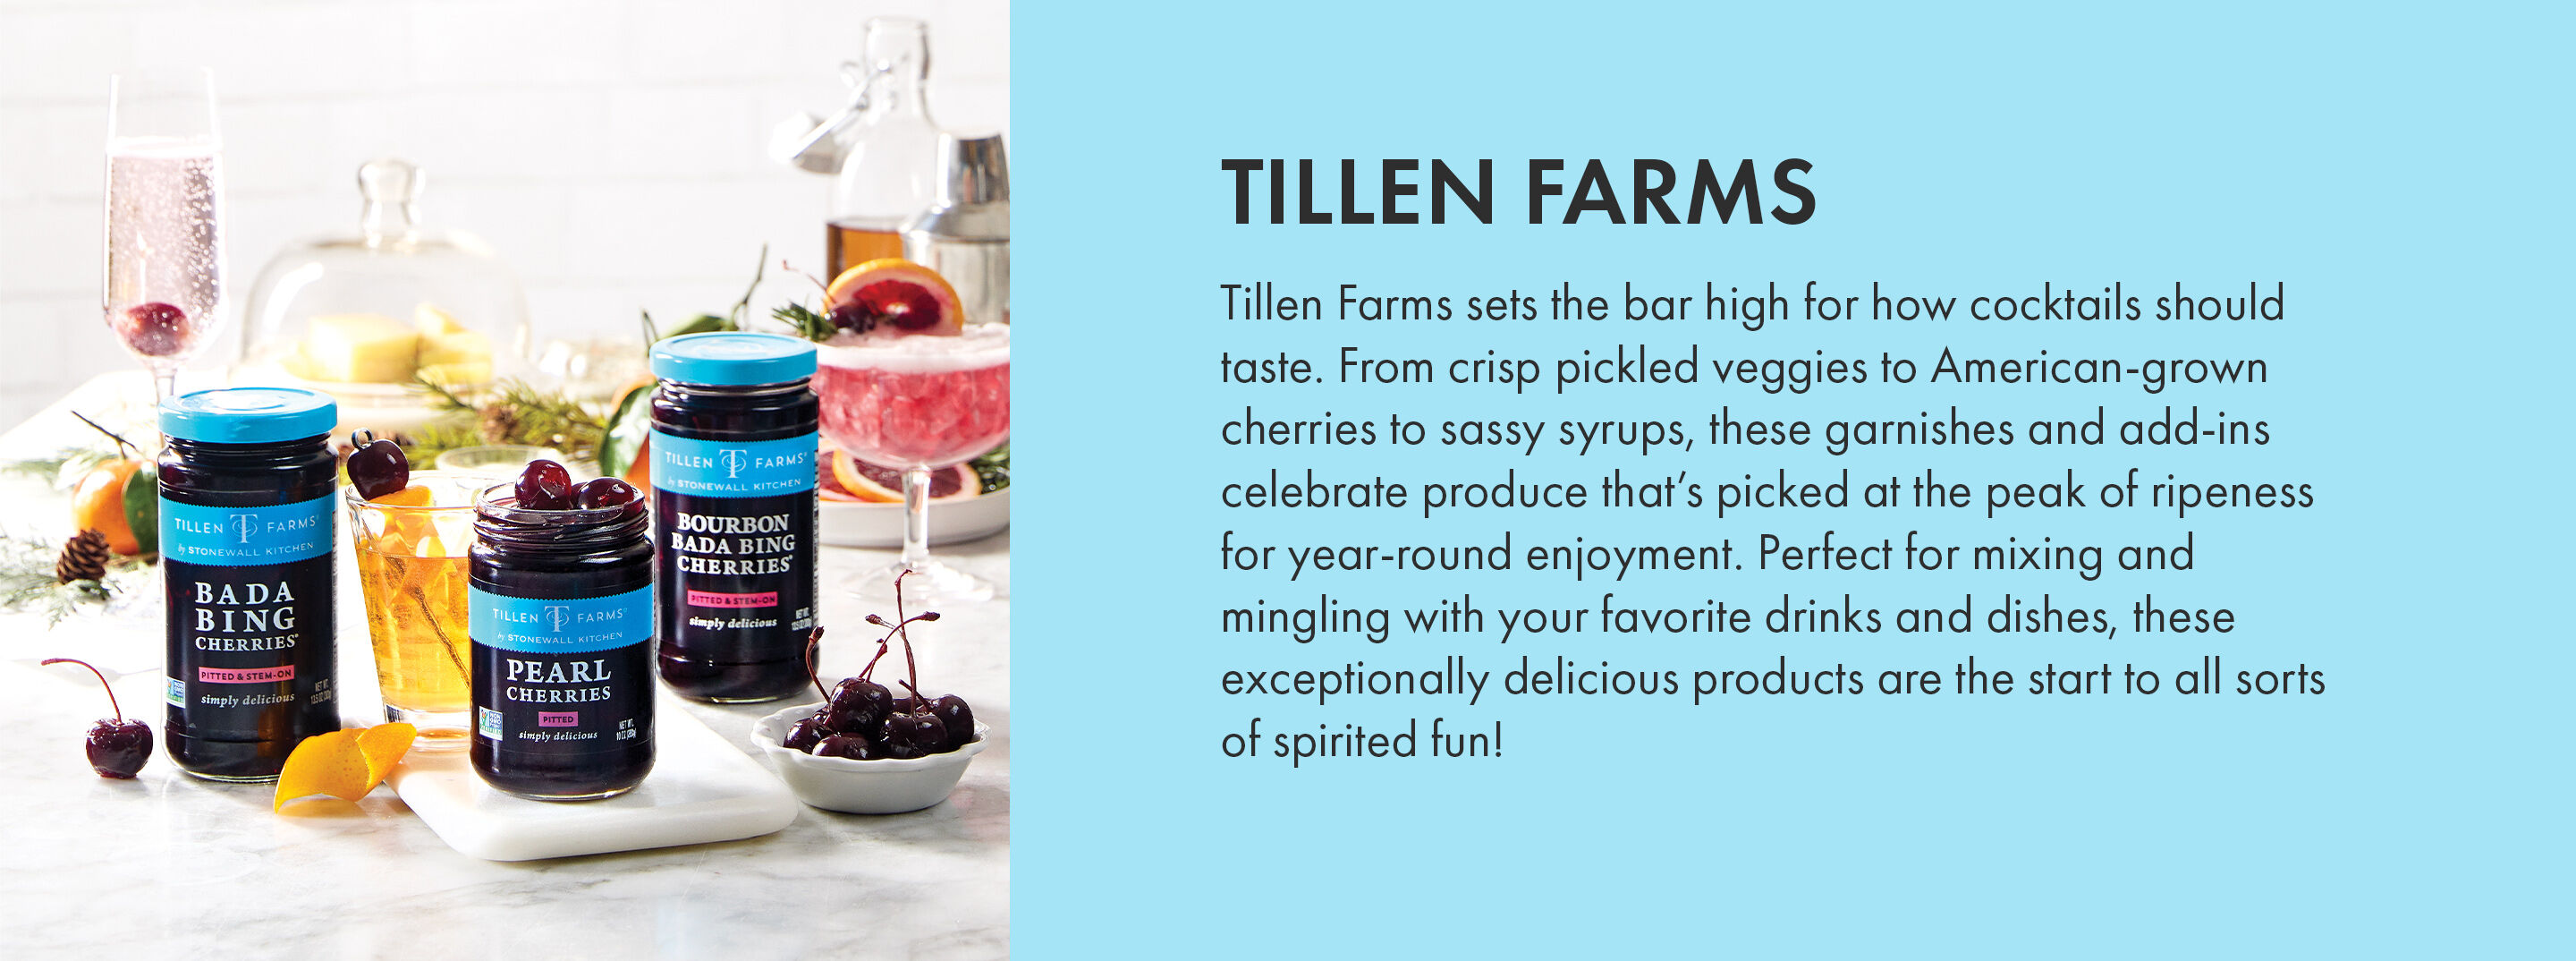 Tillen Farms | Tillen Farms sets the bar high for how cocktails should taste. From crisp pickled veggies to American-grown cherries to sassy syrups, these garnishes and add-ins celebrate produce that's picked at the peak of ripeness for year-round enjoyment. Perfect for mixing and mingling with your favorite drinks and dishes, these exceptionally delicious products are the start to all sorts of spirited fun!